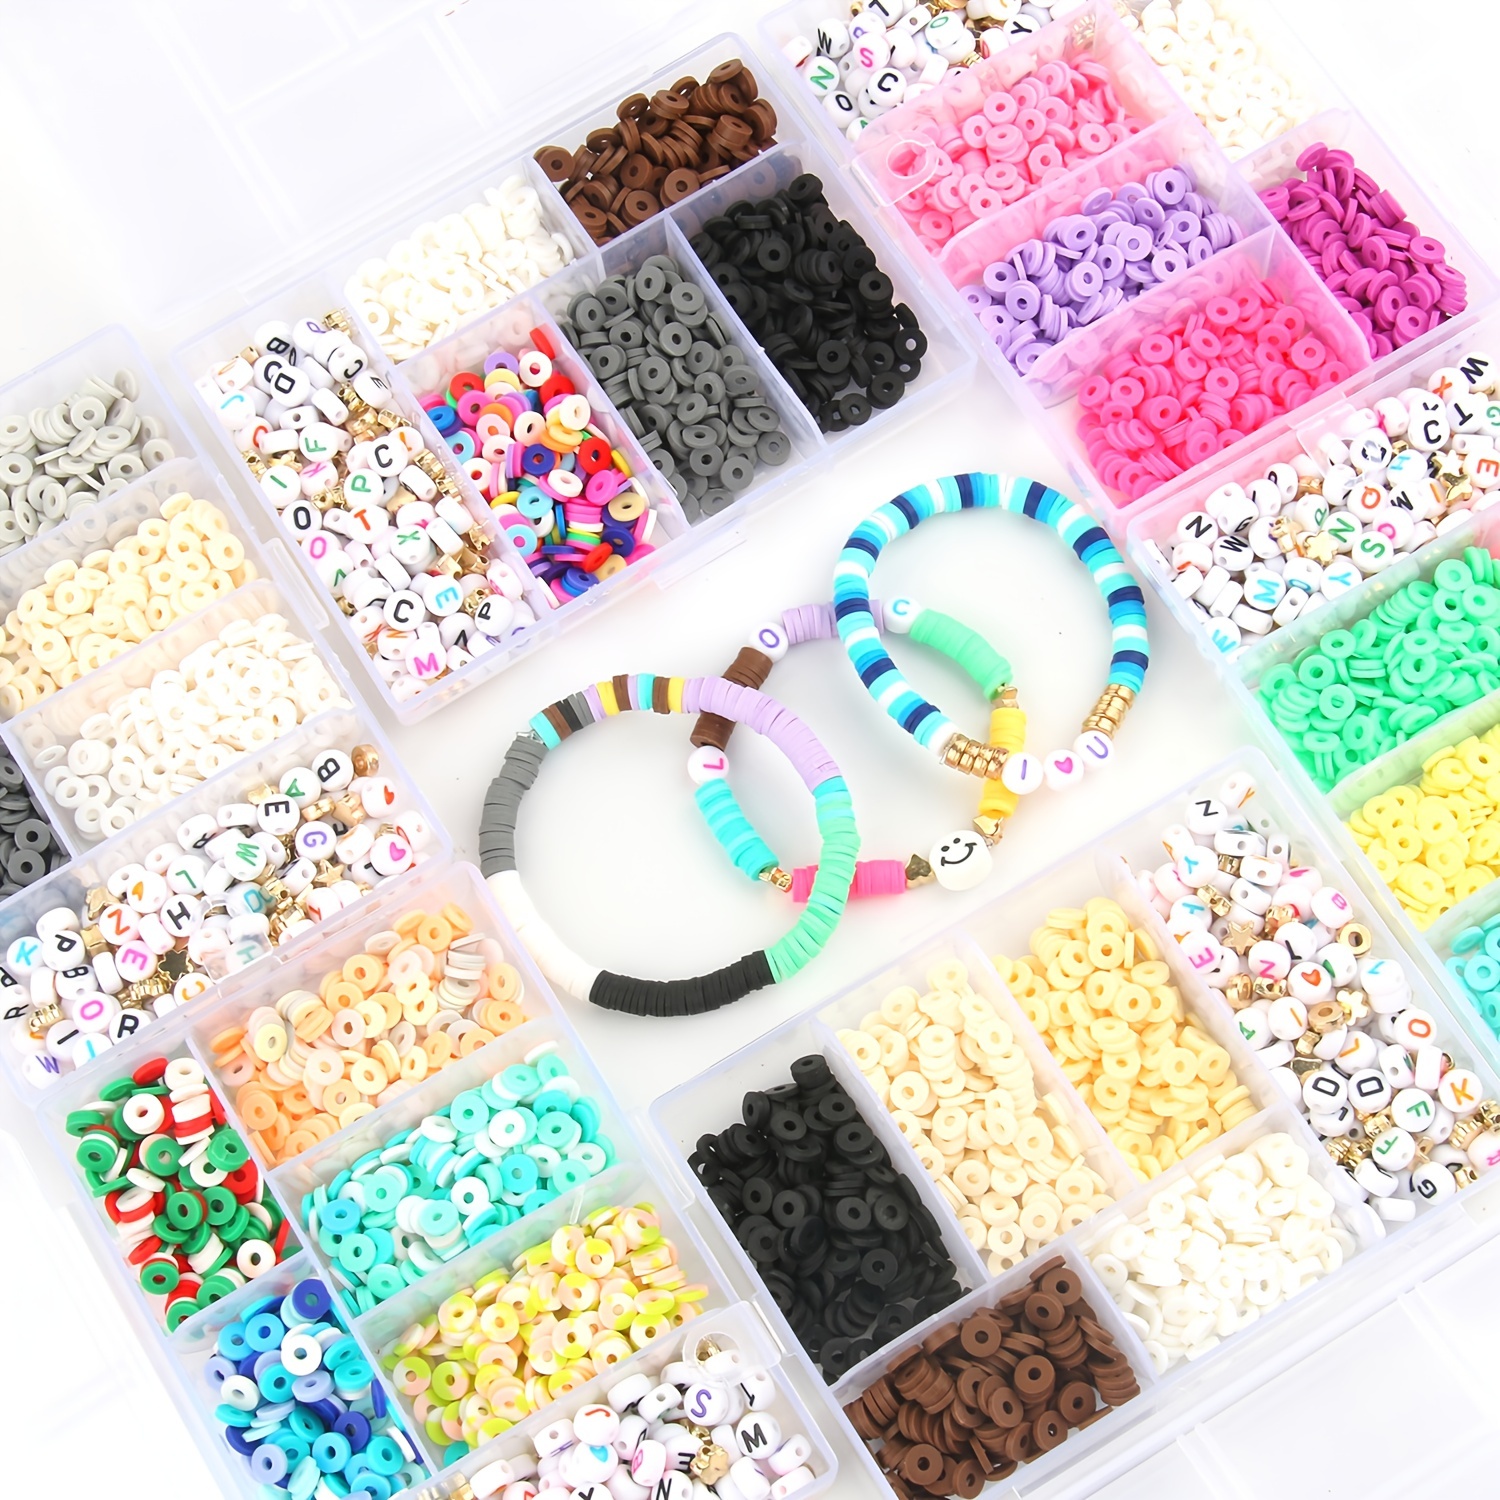 Pony Beads 1100 Pcs, Beads for Jewelry Making, Beads for Bracelets